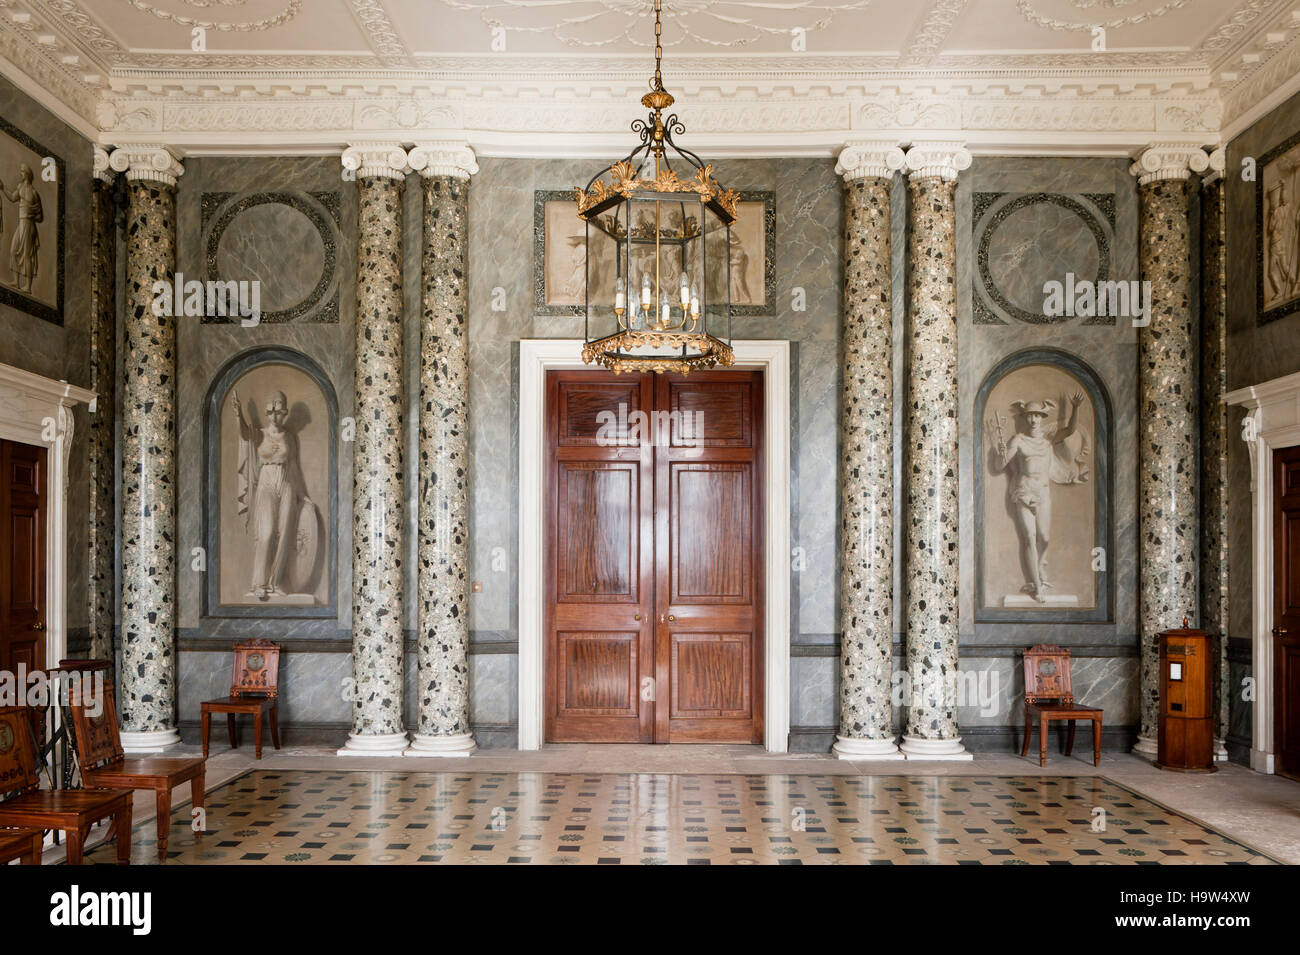 The Entrance Hall at Attingham Park, Shropshire. The room was designed by George Steuart for Lord Berwick in the late eighteenth century. Stock Photo